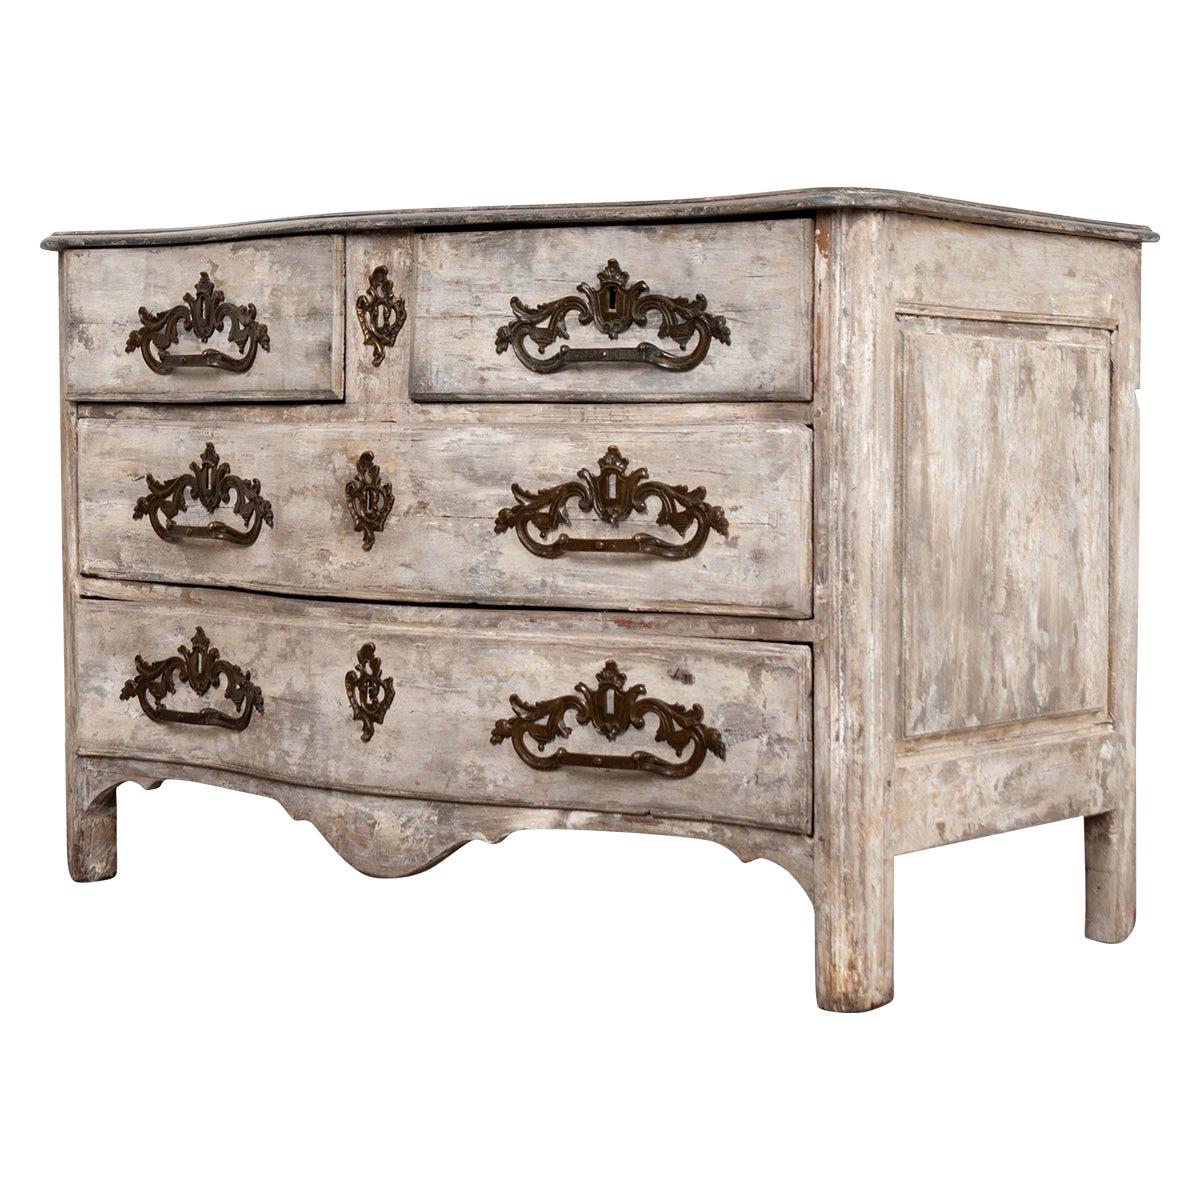 French 18th Century Painted Parisian Commode For Sale